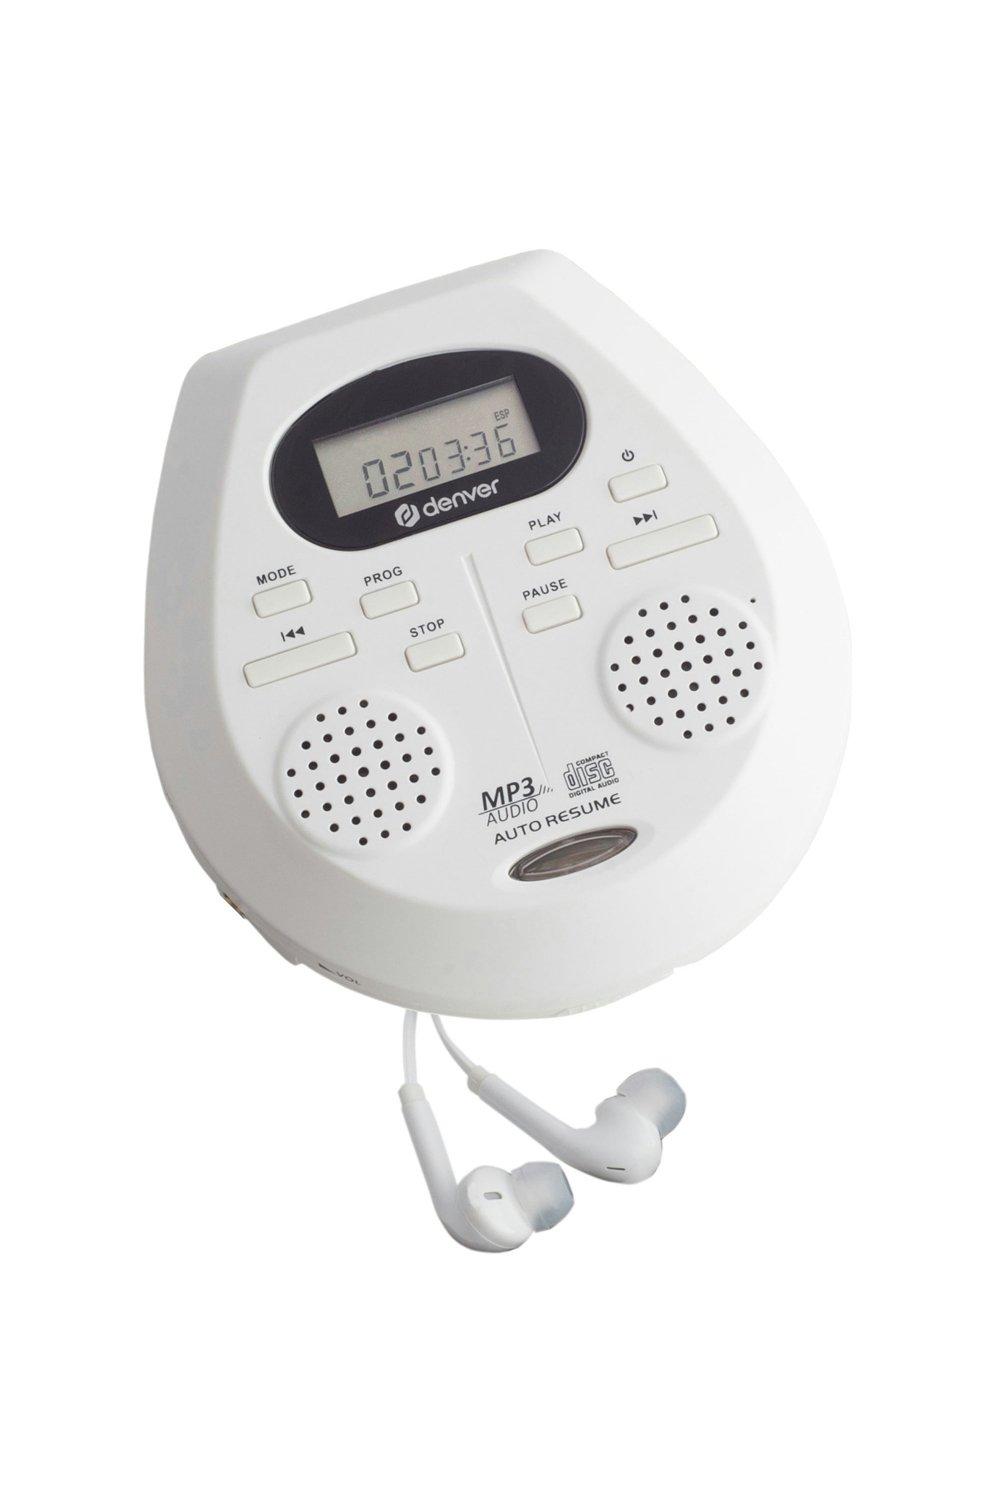 Denver 'DMP-395' Portable CD Player with Speakers CD Walkman MP3 & Audio Book|white